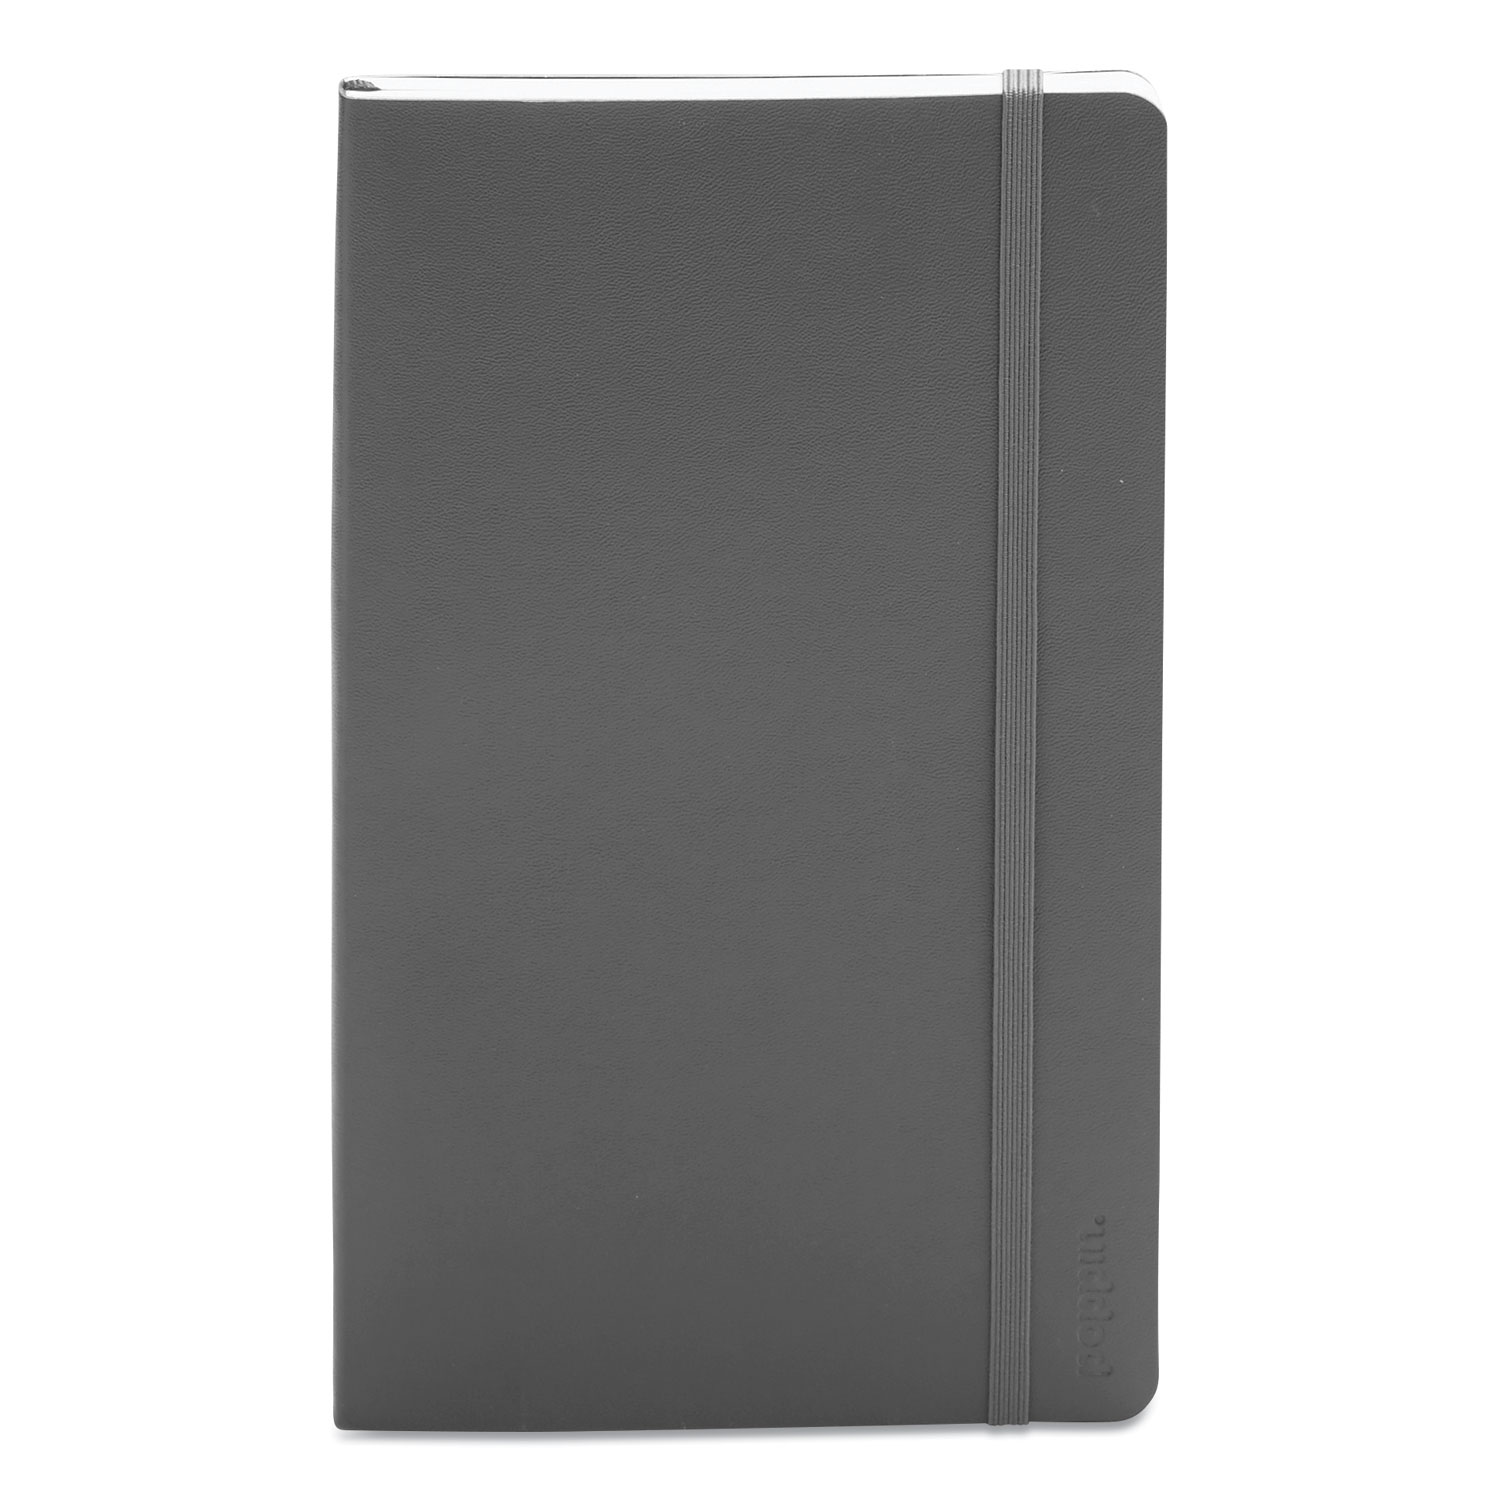  Poppin 103193 Professional Notebook, College Rule, Dark Gray 8.25 x 5, 96 Sheets (PPJ2736724) 